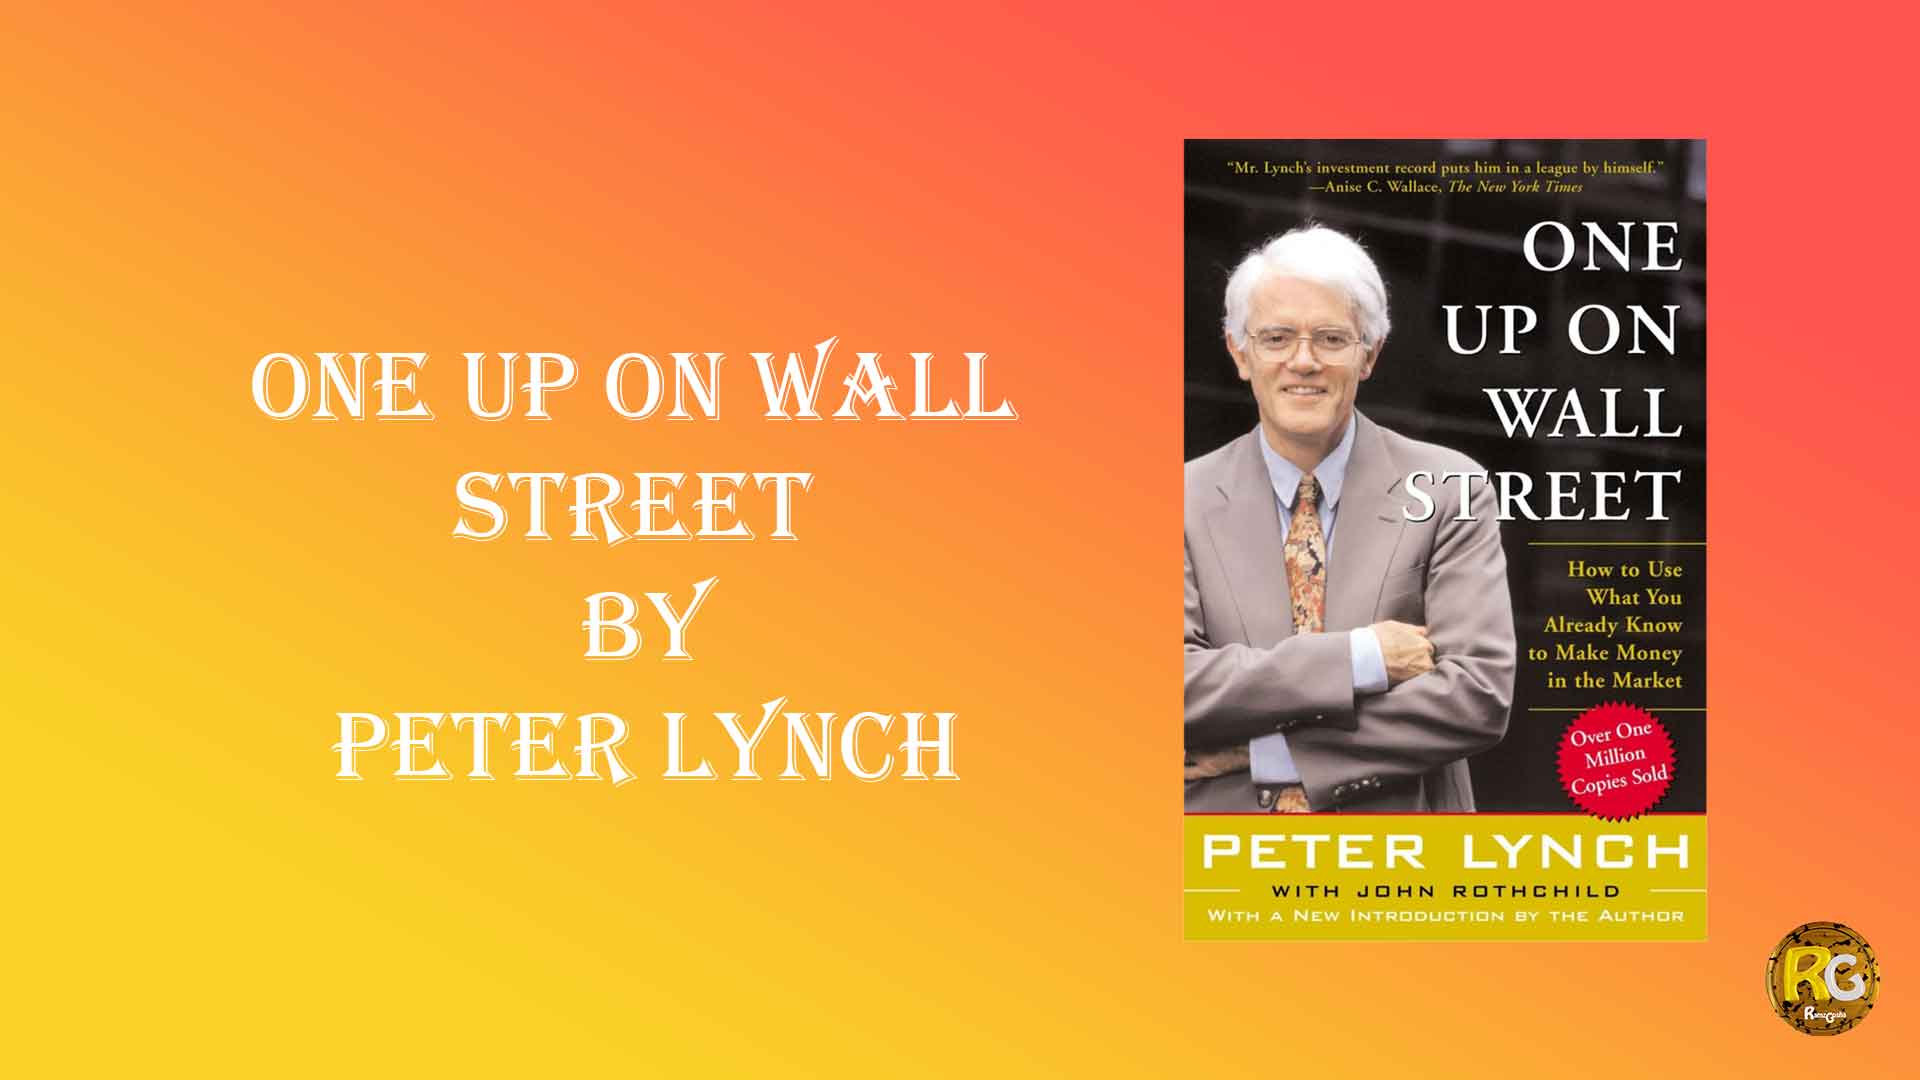 One Up On Wall Street by Peter Lynch